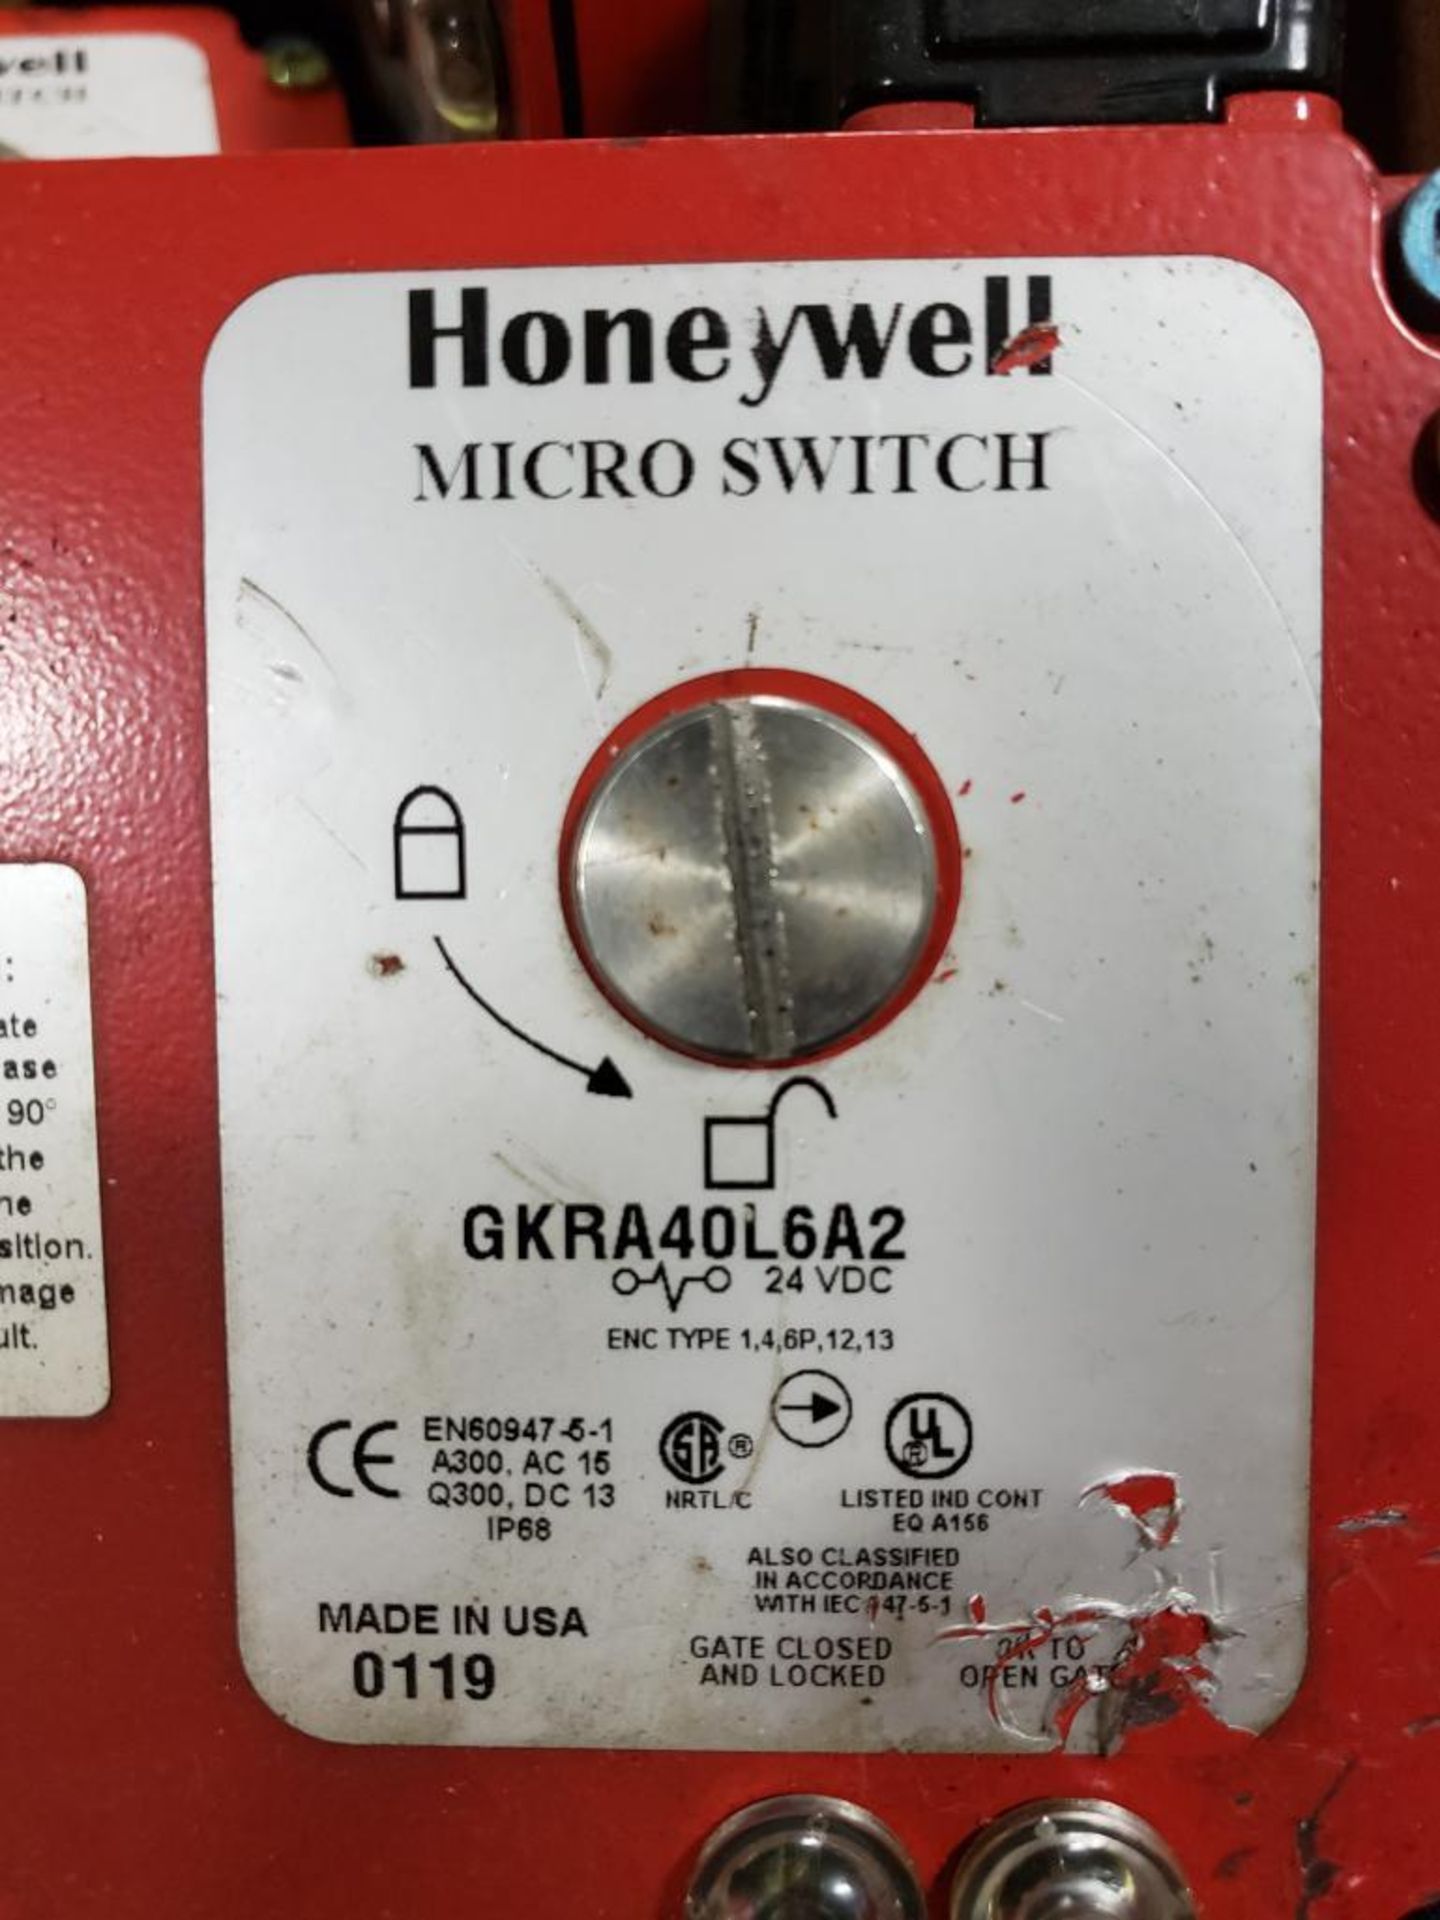 Qty 5 - Honeywell Microswitch. Part number GKLA40L6A2. - Image 3 of 3